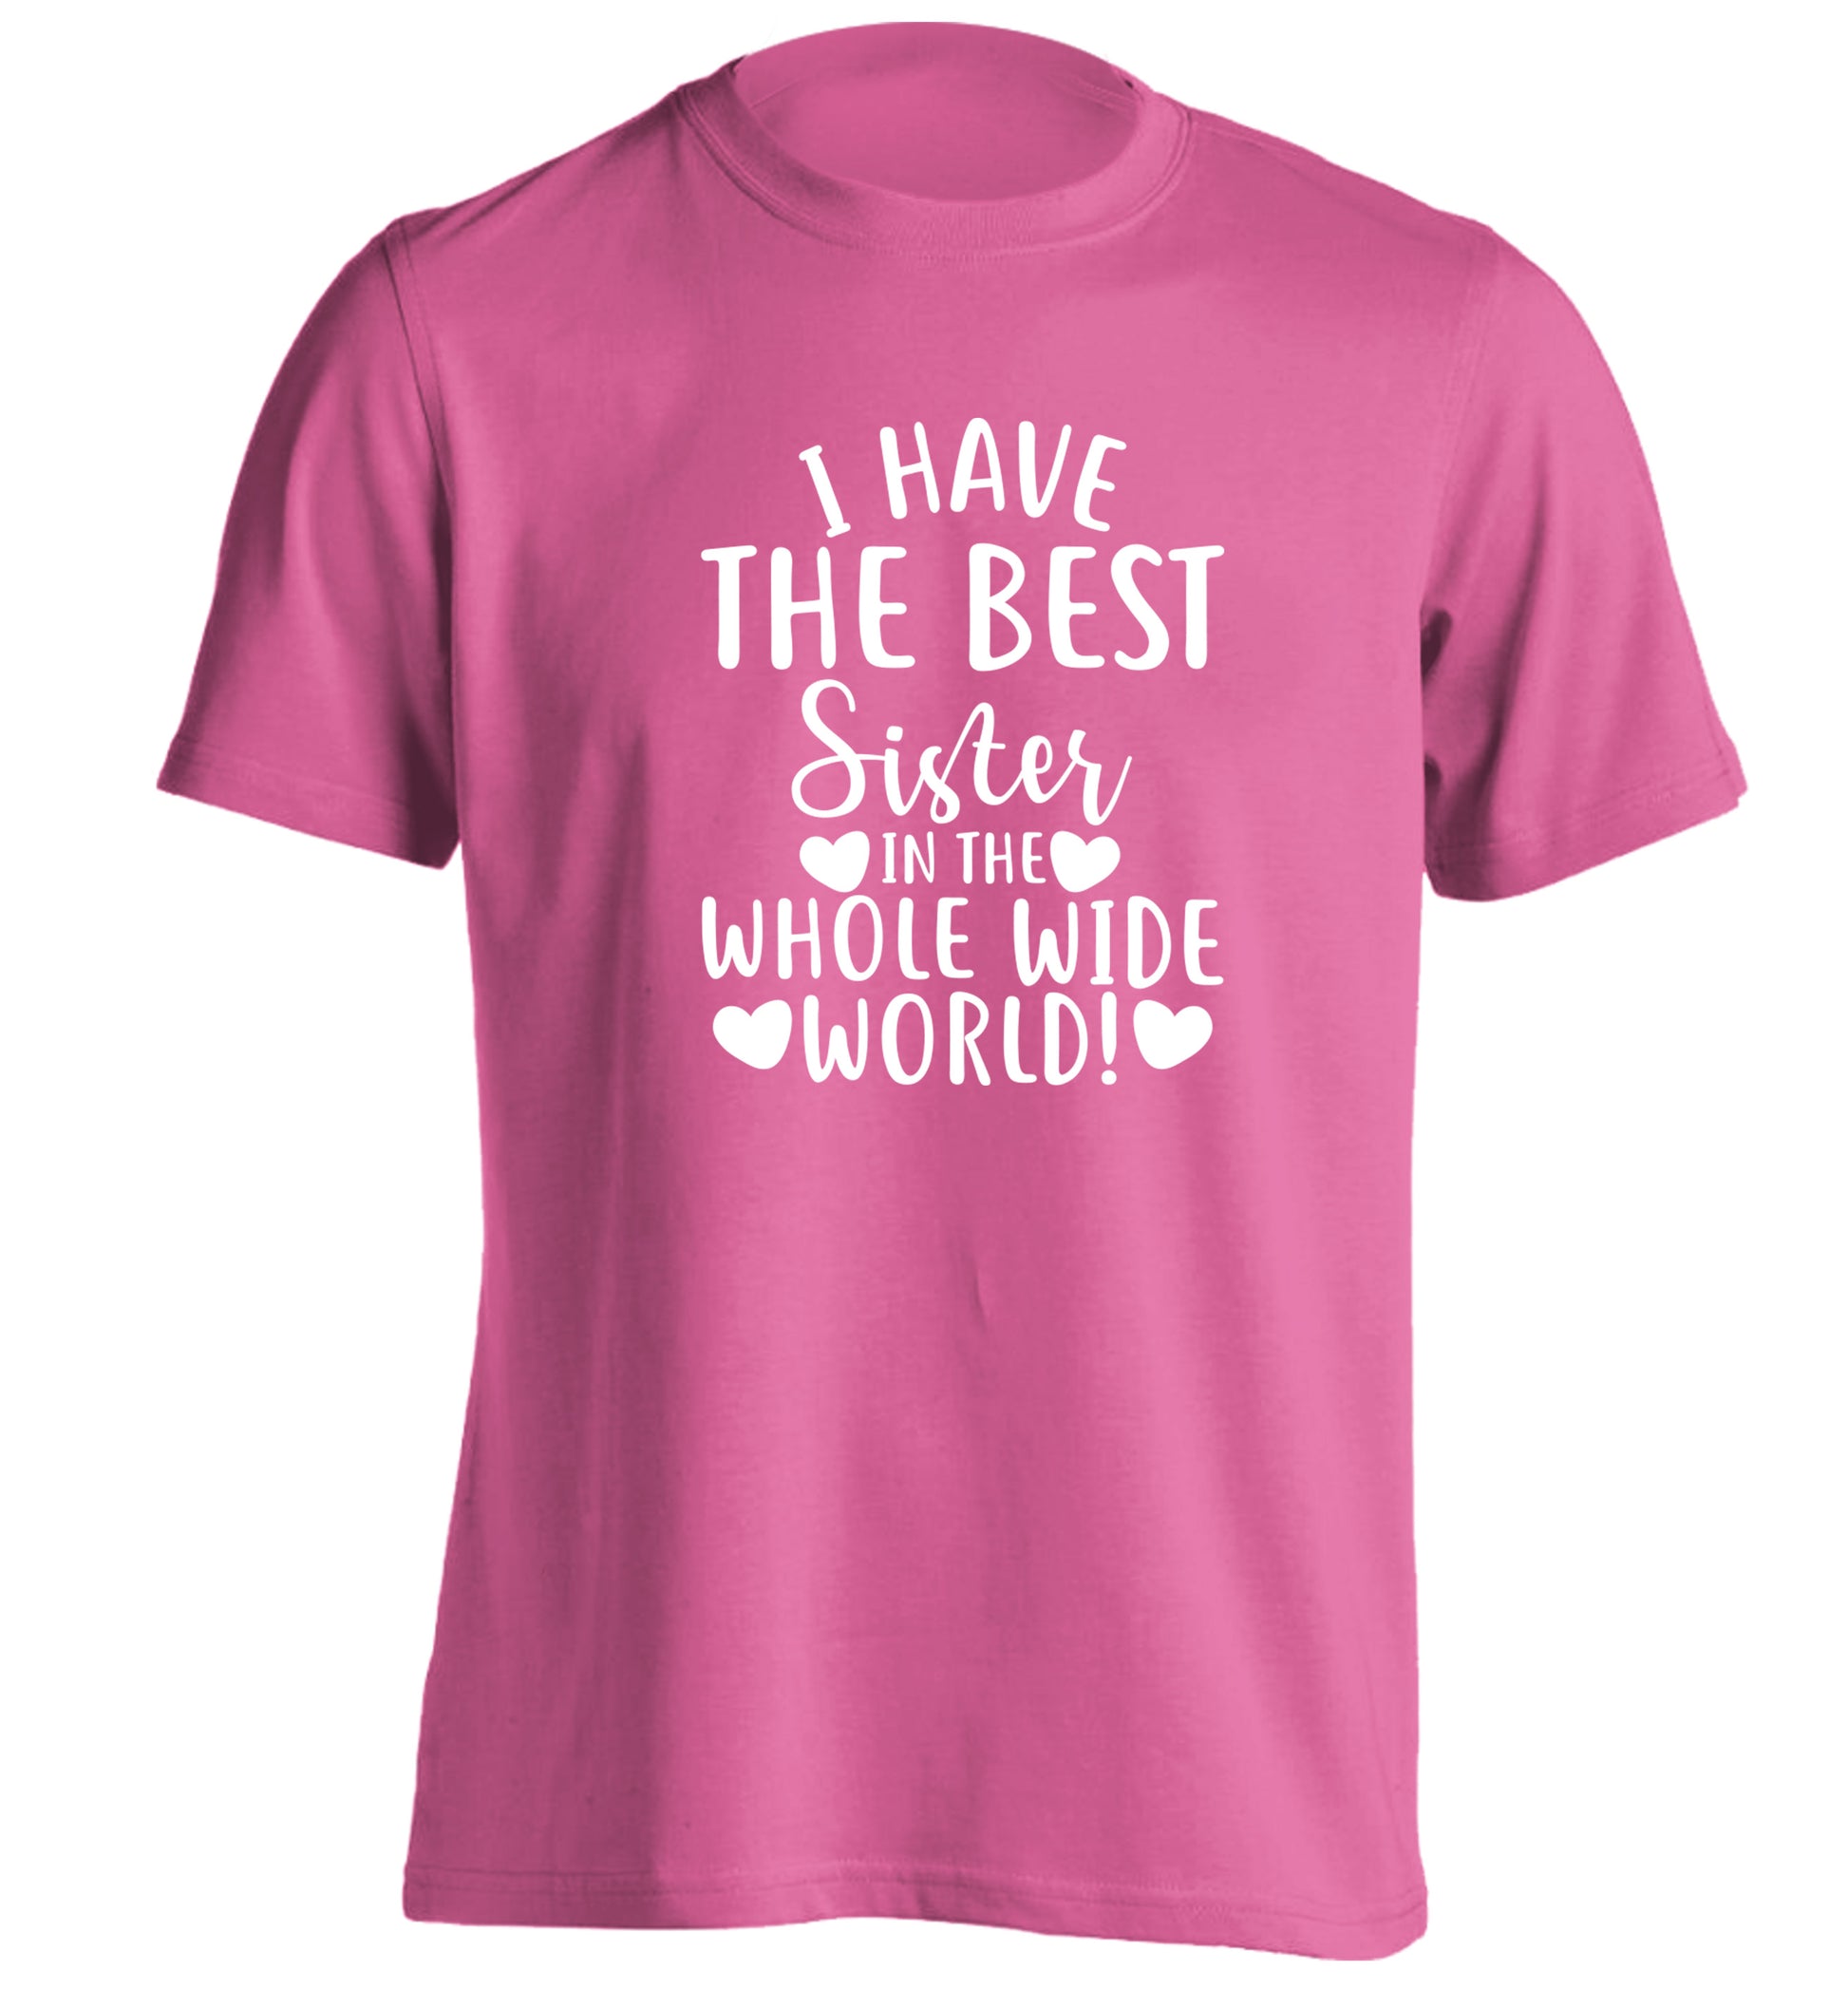 I have the best sister in the whole wide world! adults unisex pink Tshirt 2XL